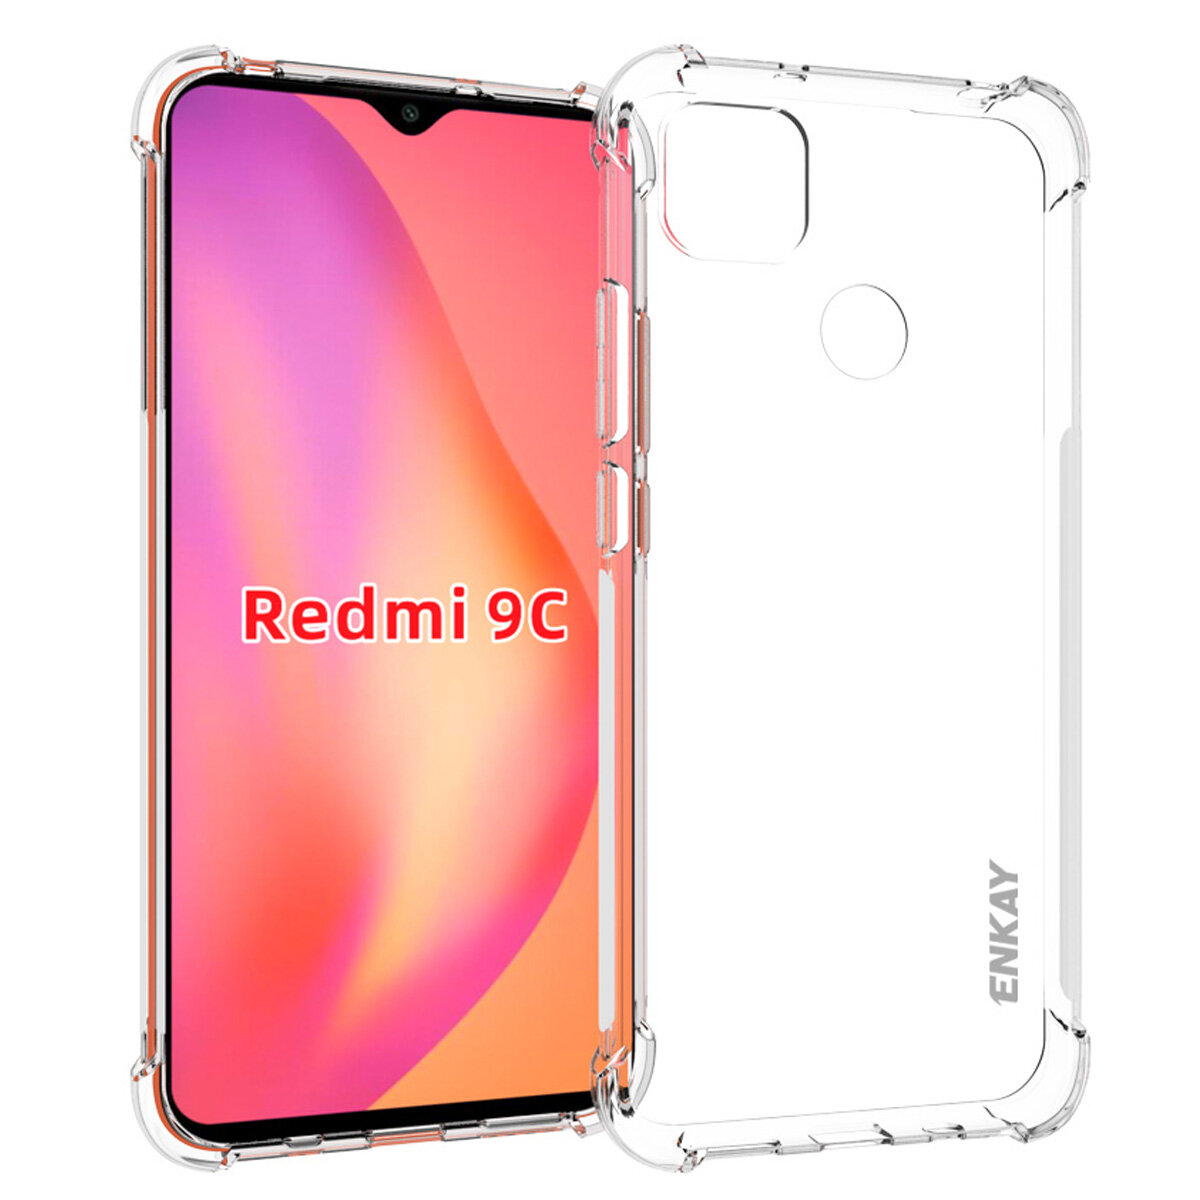 Enkay 2-in-1 for Xiaomi Redmi 9C Accessories with Airbags Non-Yellow Transparent TPU Protective Case + 9H Anti-Scratch Tempered Glass Screen Protector Non-Original